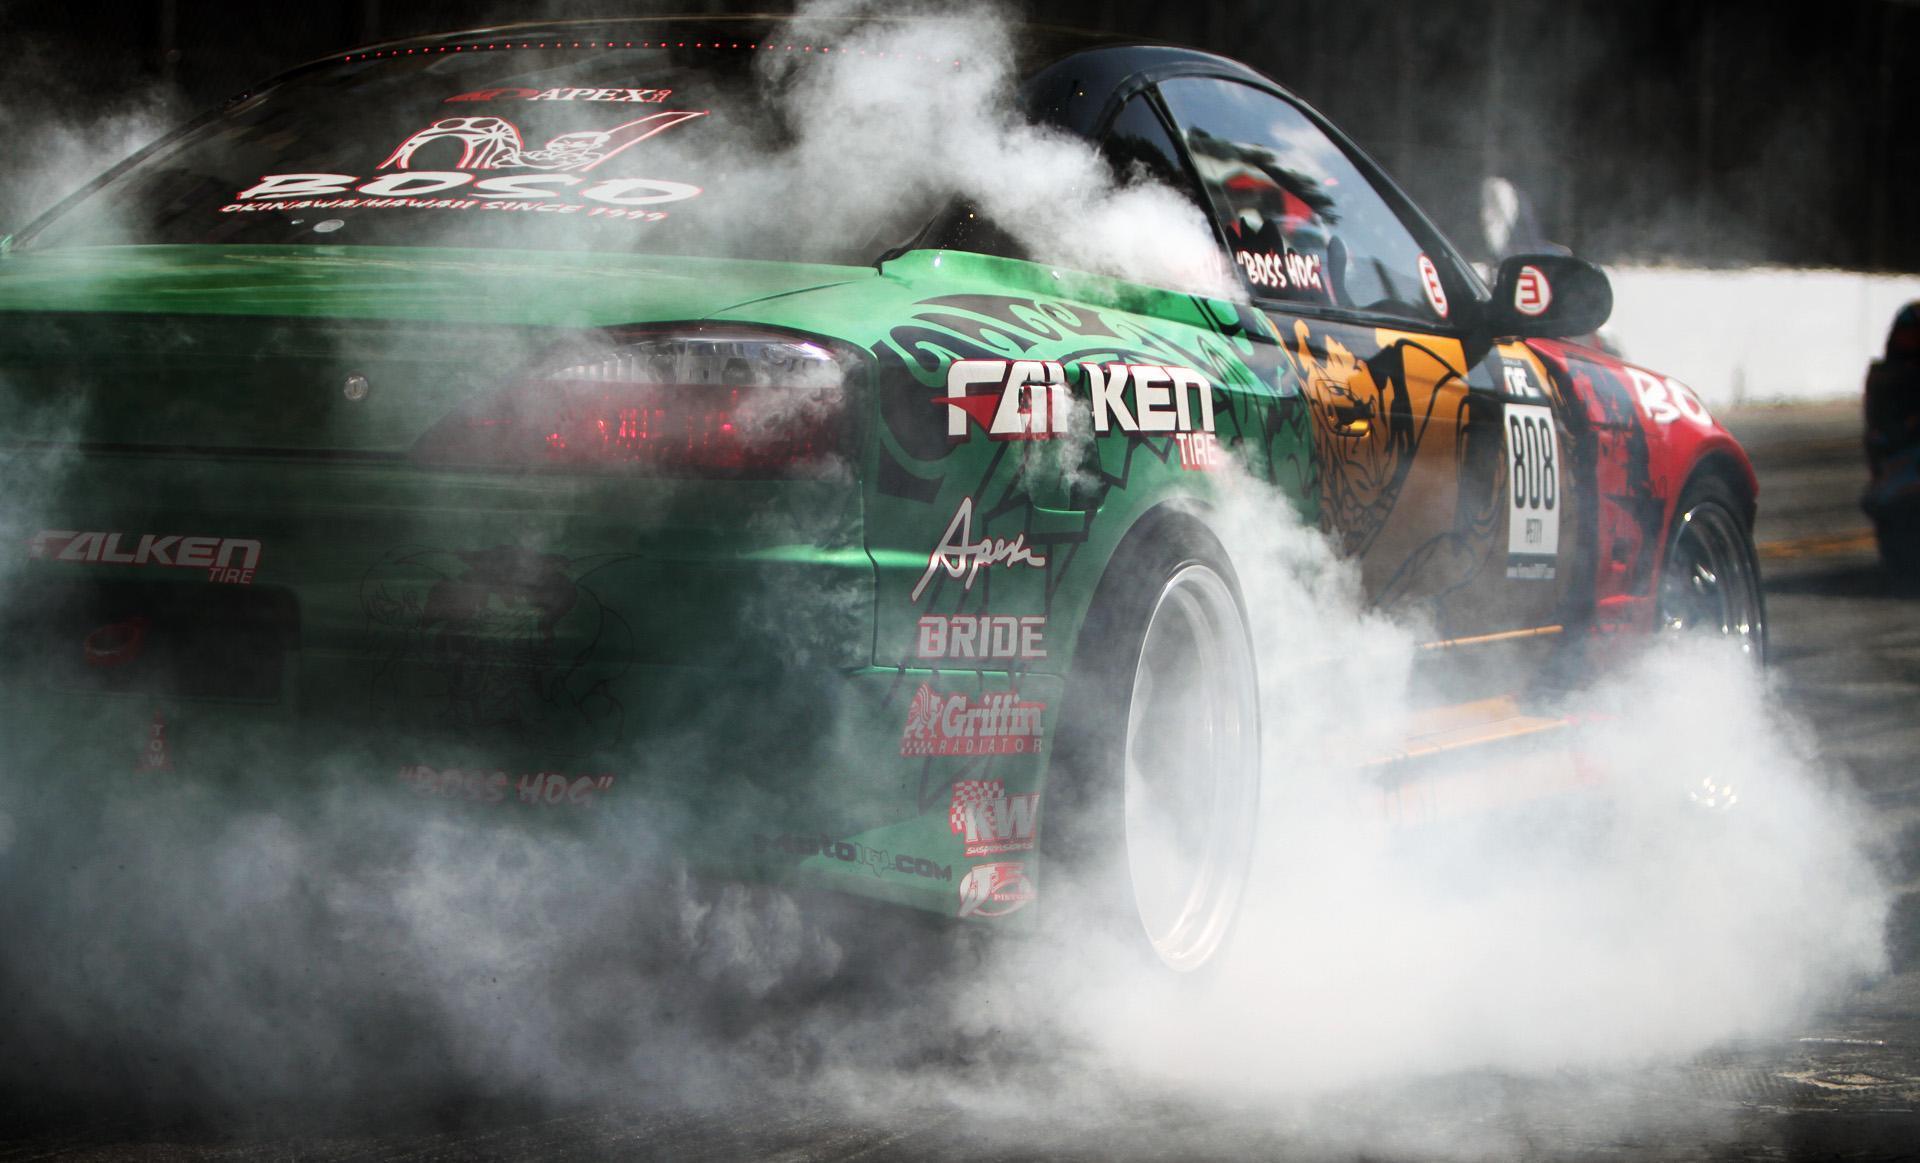 Download Drift wallpapers for mobile phone, free Drift HD pictures